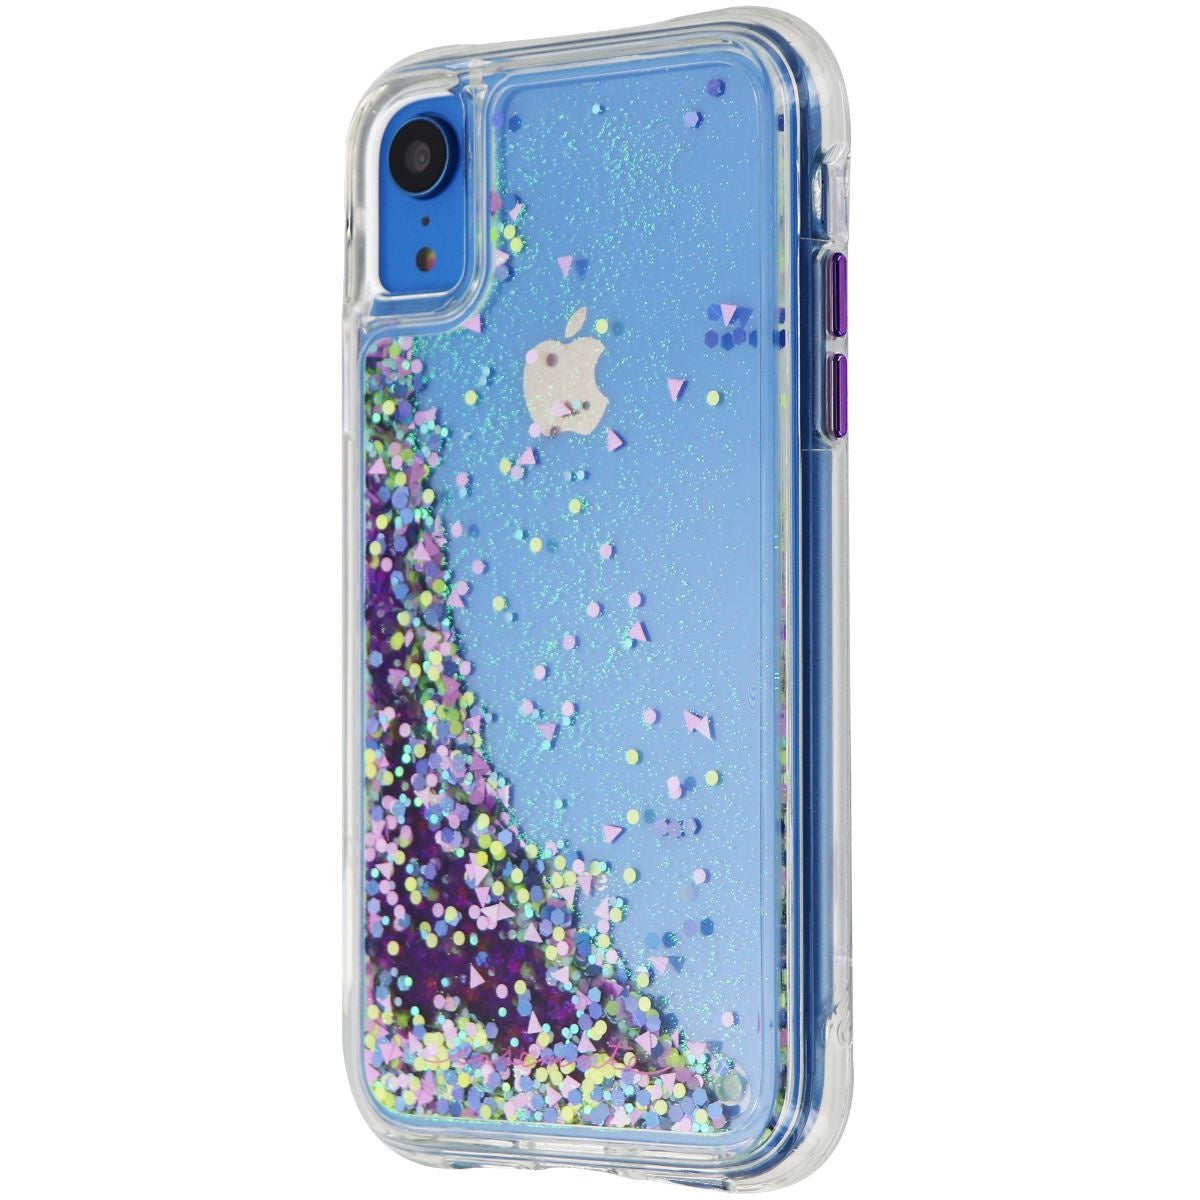 Case-Mate Waterfall Glow Series Case for Apple iPhone XR - Clear / Purple Glow